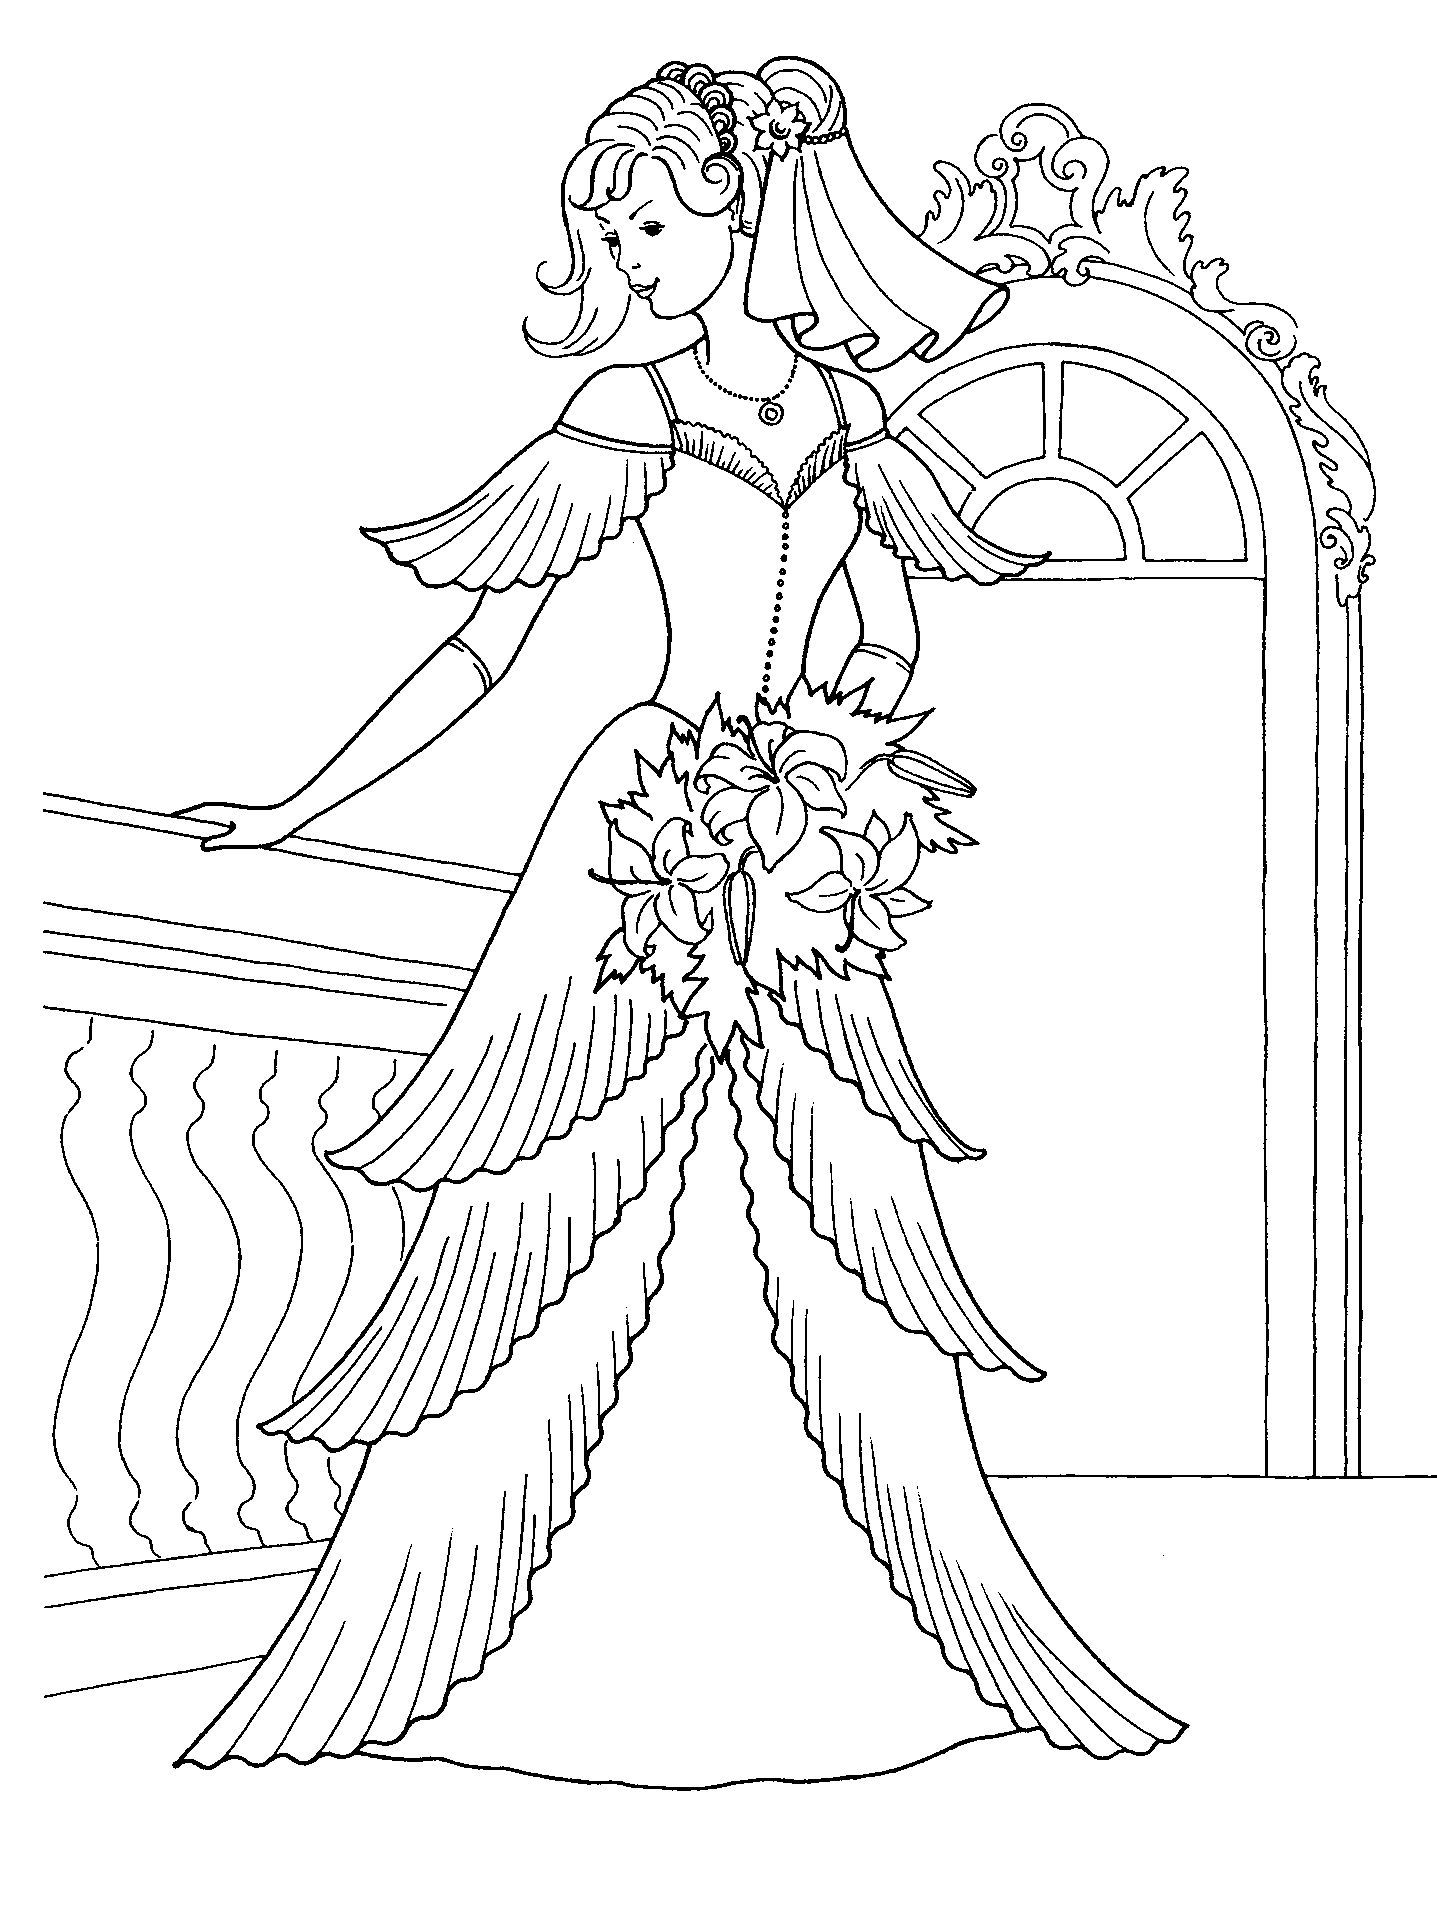 Princess pictures - coloring pages - Coloring Pages | Wallpapers ...